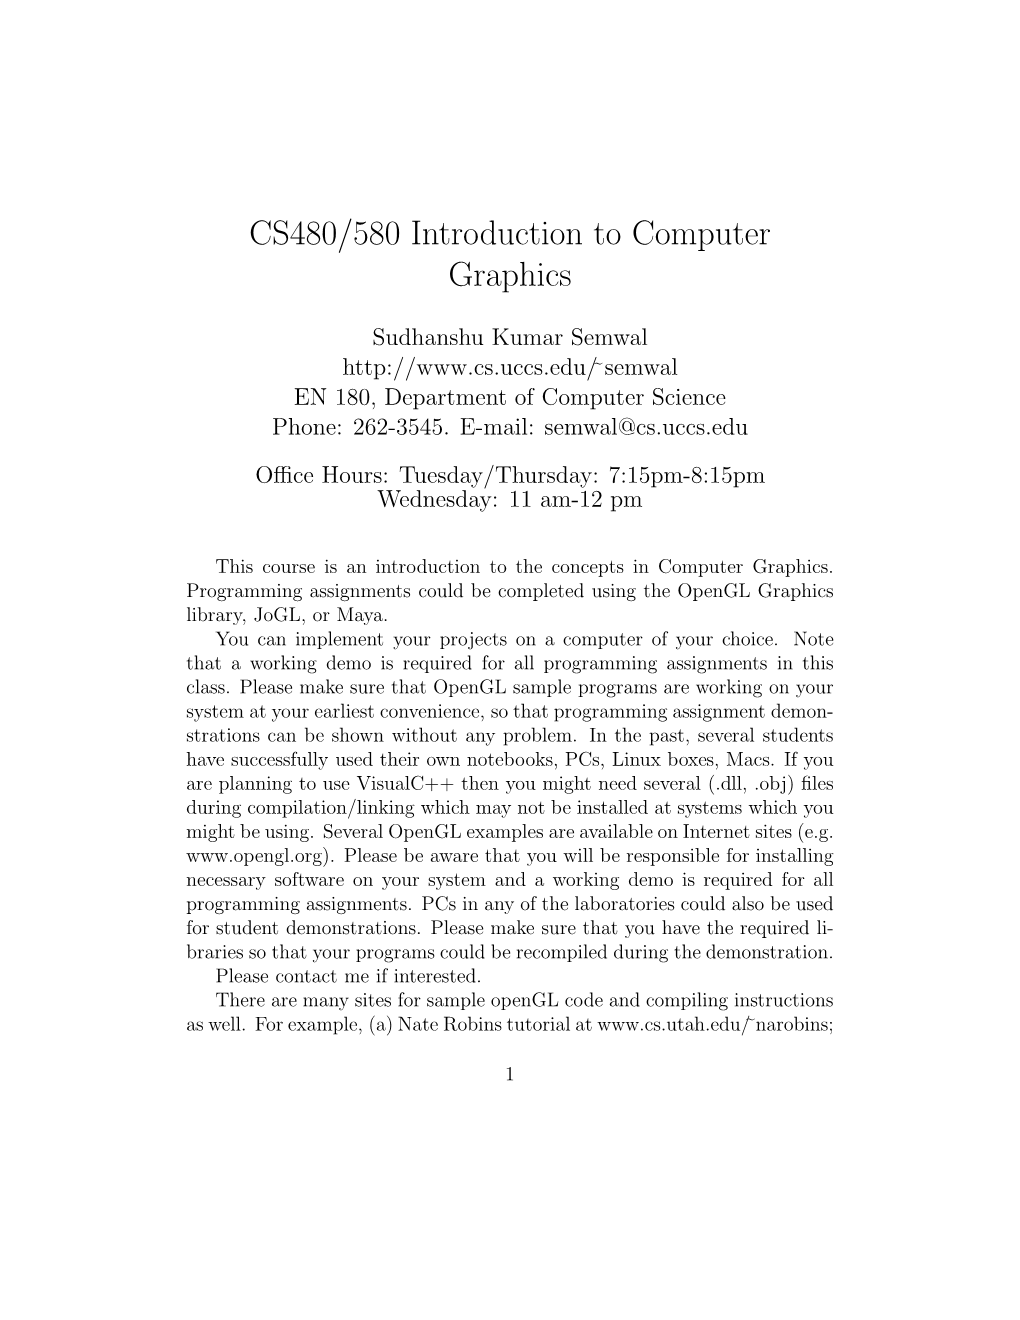 CS480/580 Introduction to Computer Graphics